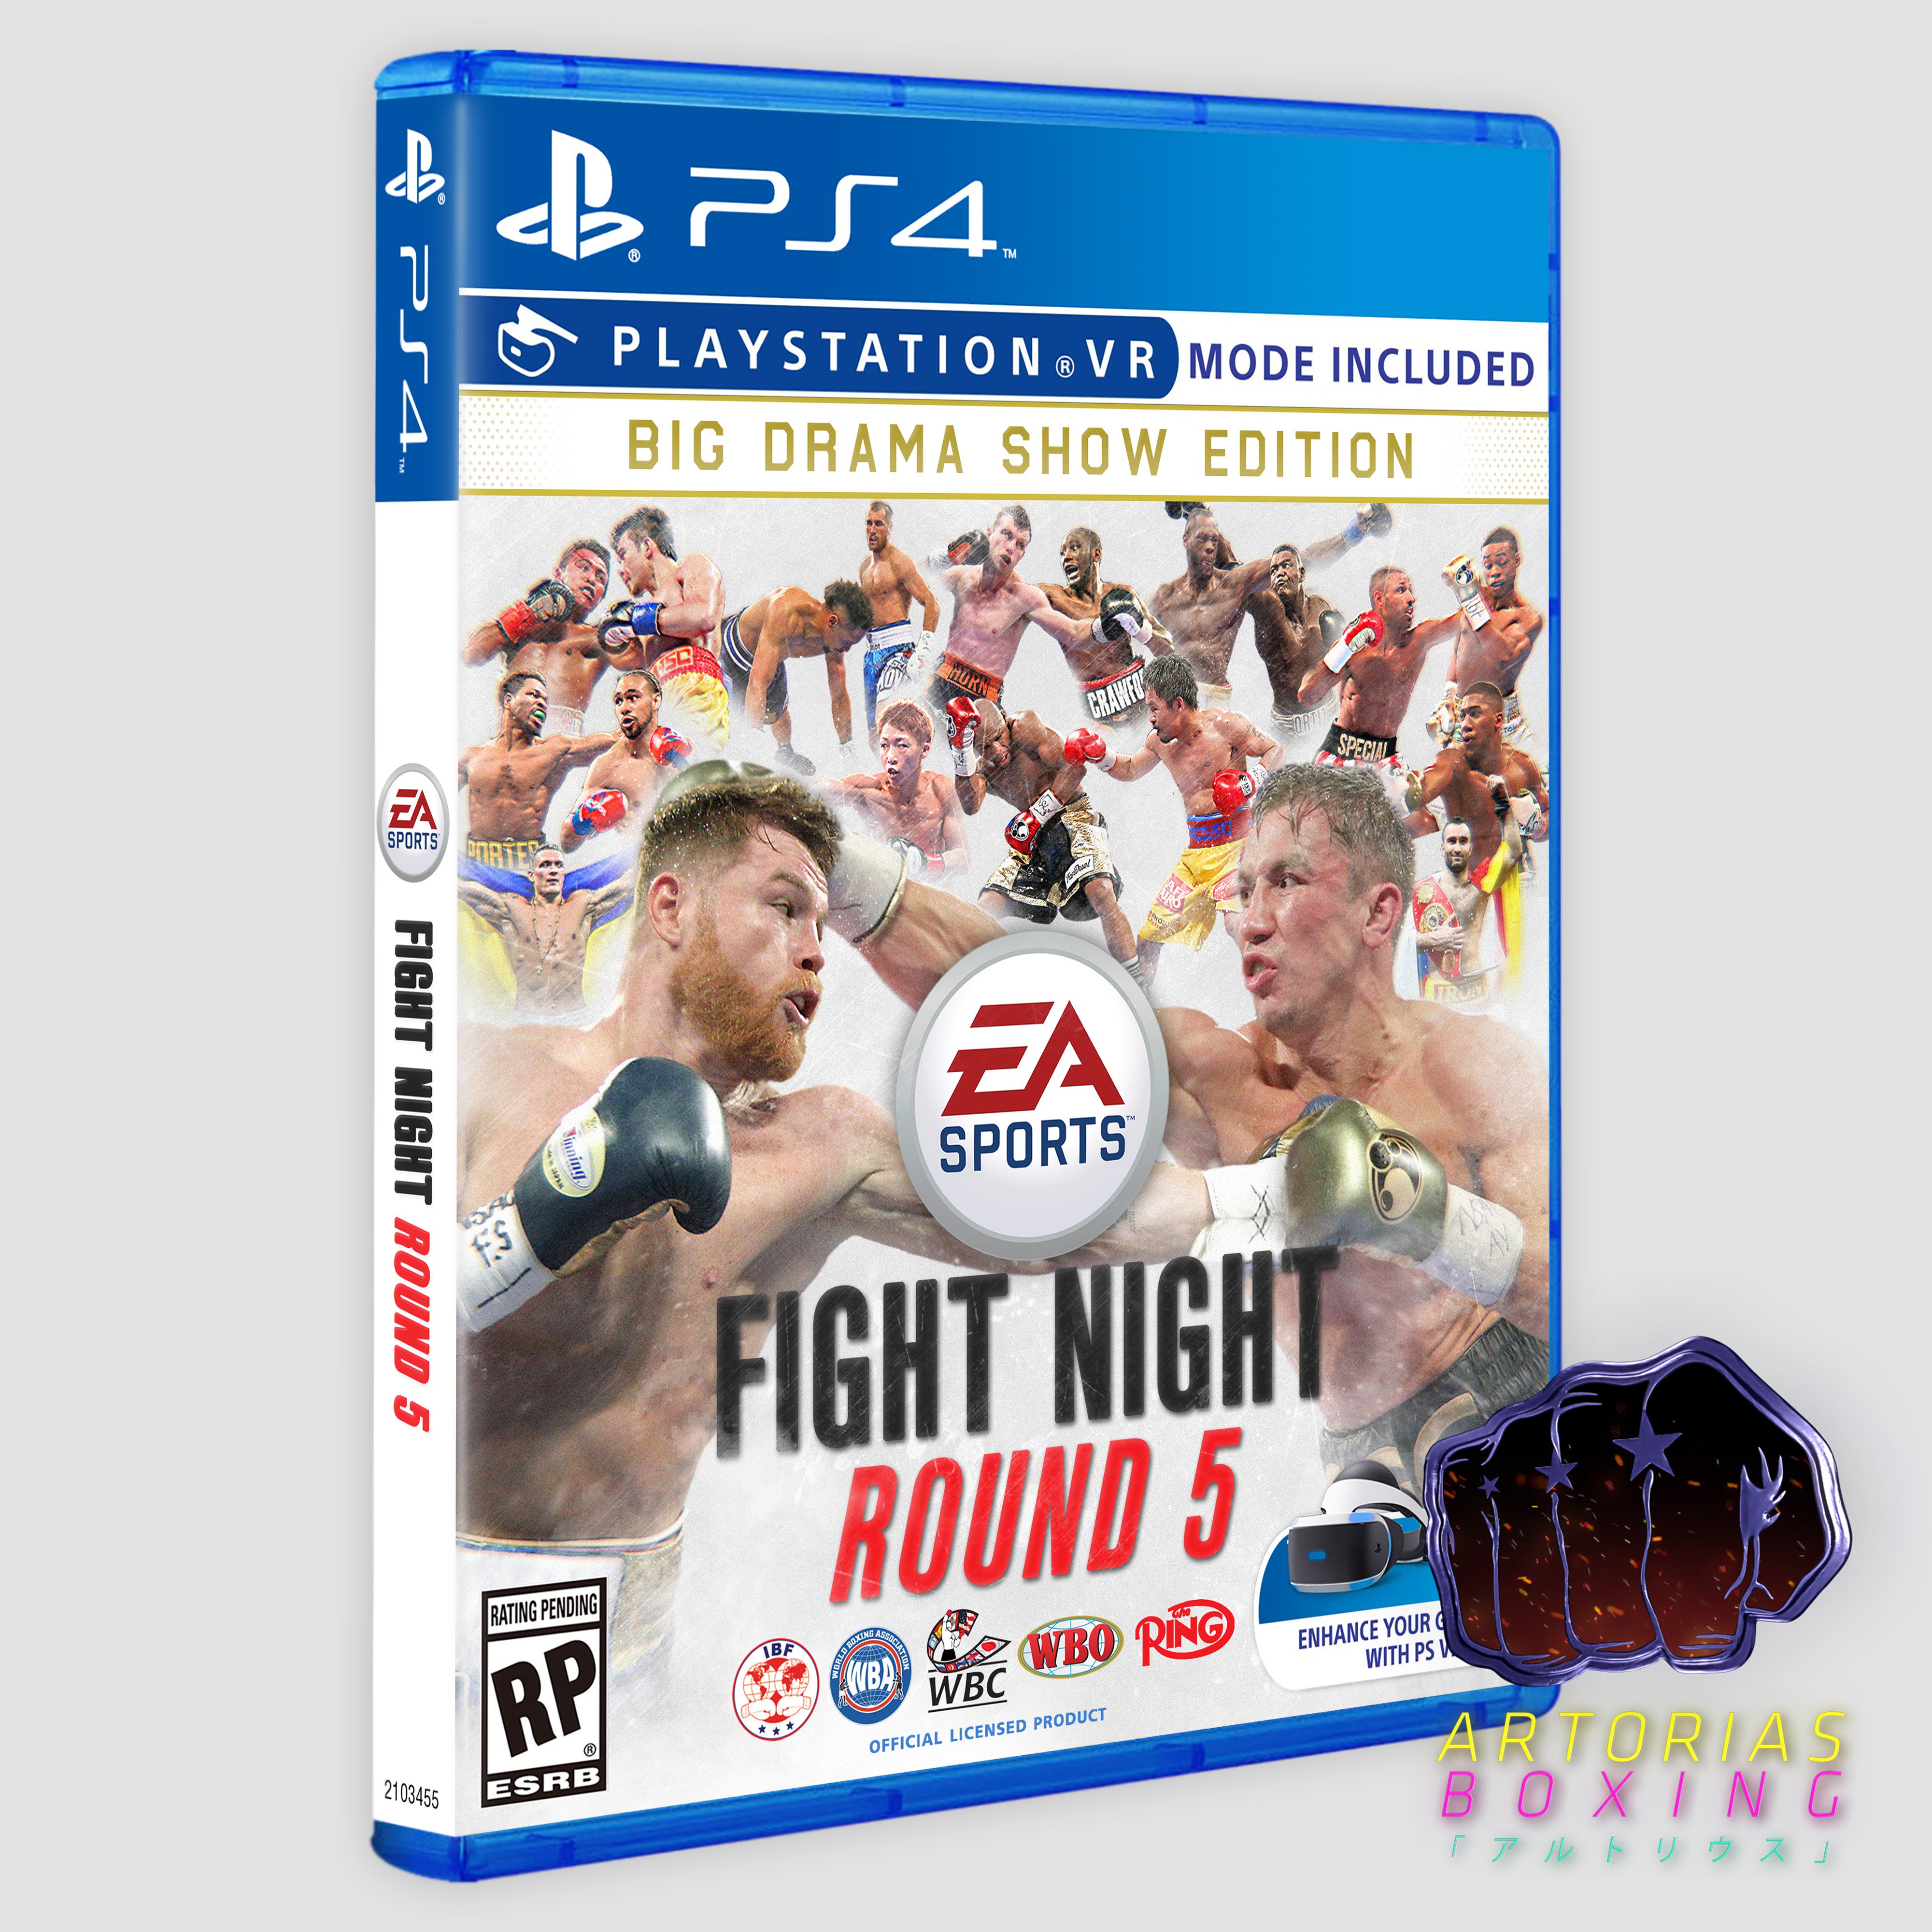 Betinget praktiserende læge Port Twitter 上的Artorias Boxing 🥊📼："Is very unlikely this happens but here's my  take on the Fight Night Round 5 cover art #FightNightRound5 #EASports  @EASPORTS #Boxing #Boxeo #GGG #Canelo #CaneloGGG2 #Pacquiao #Mayweather #PS4  #